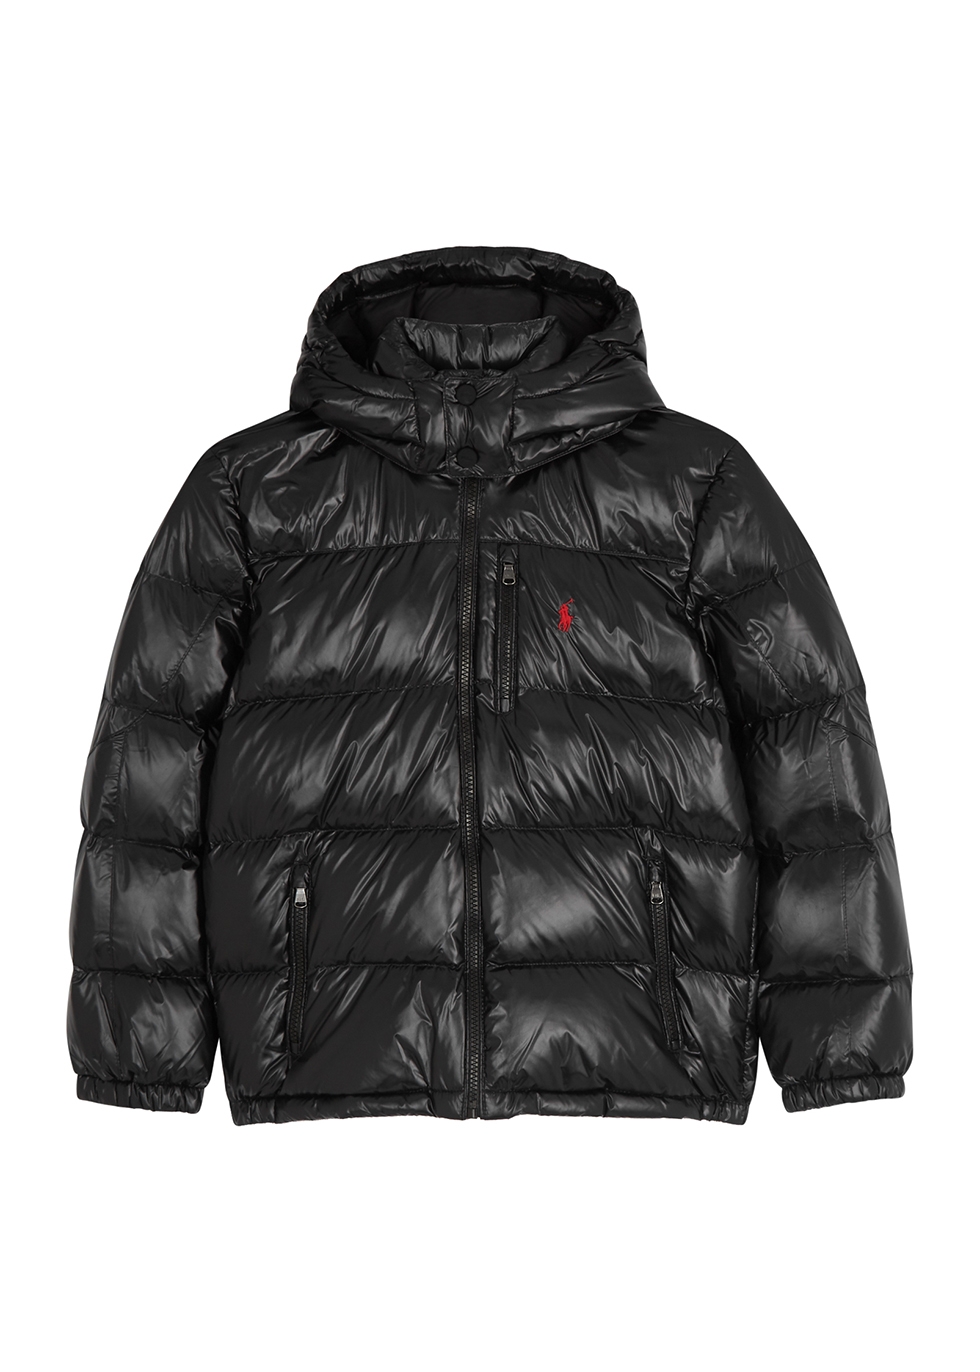 Polo Ralph Lauren Black quilted glossed shell jacket - Harvey Nichols